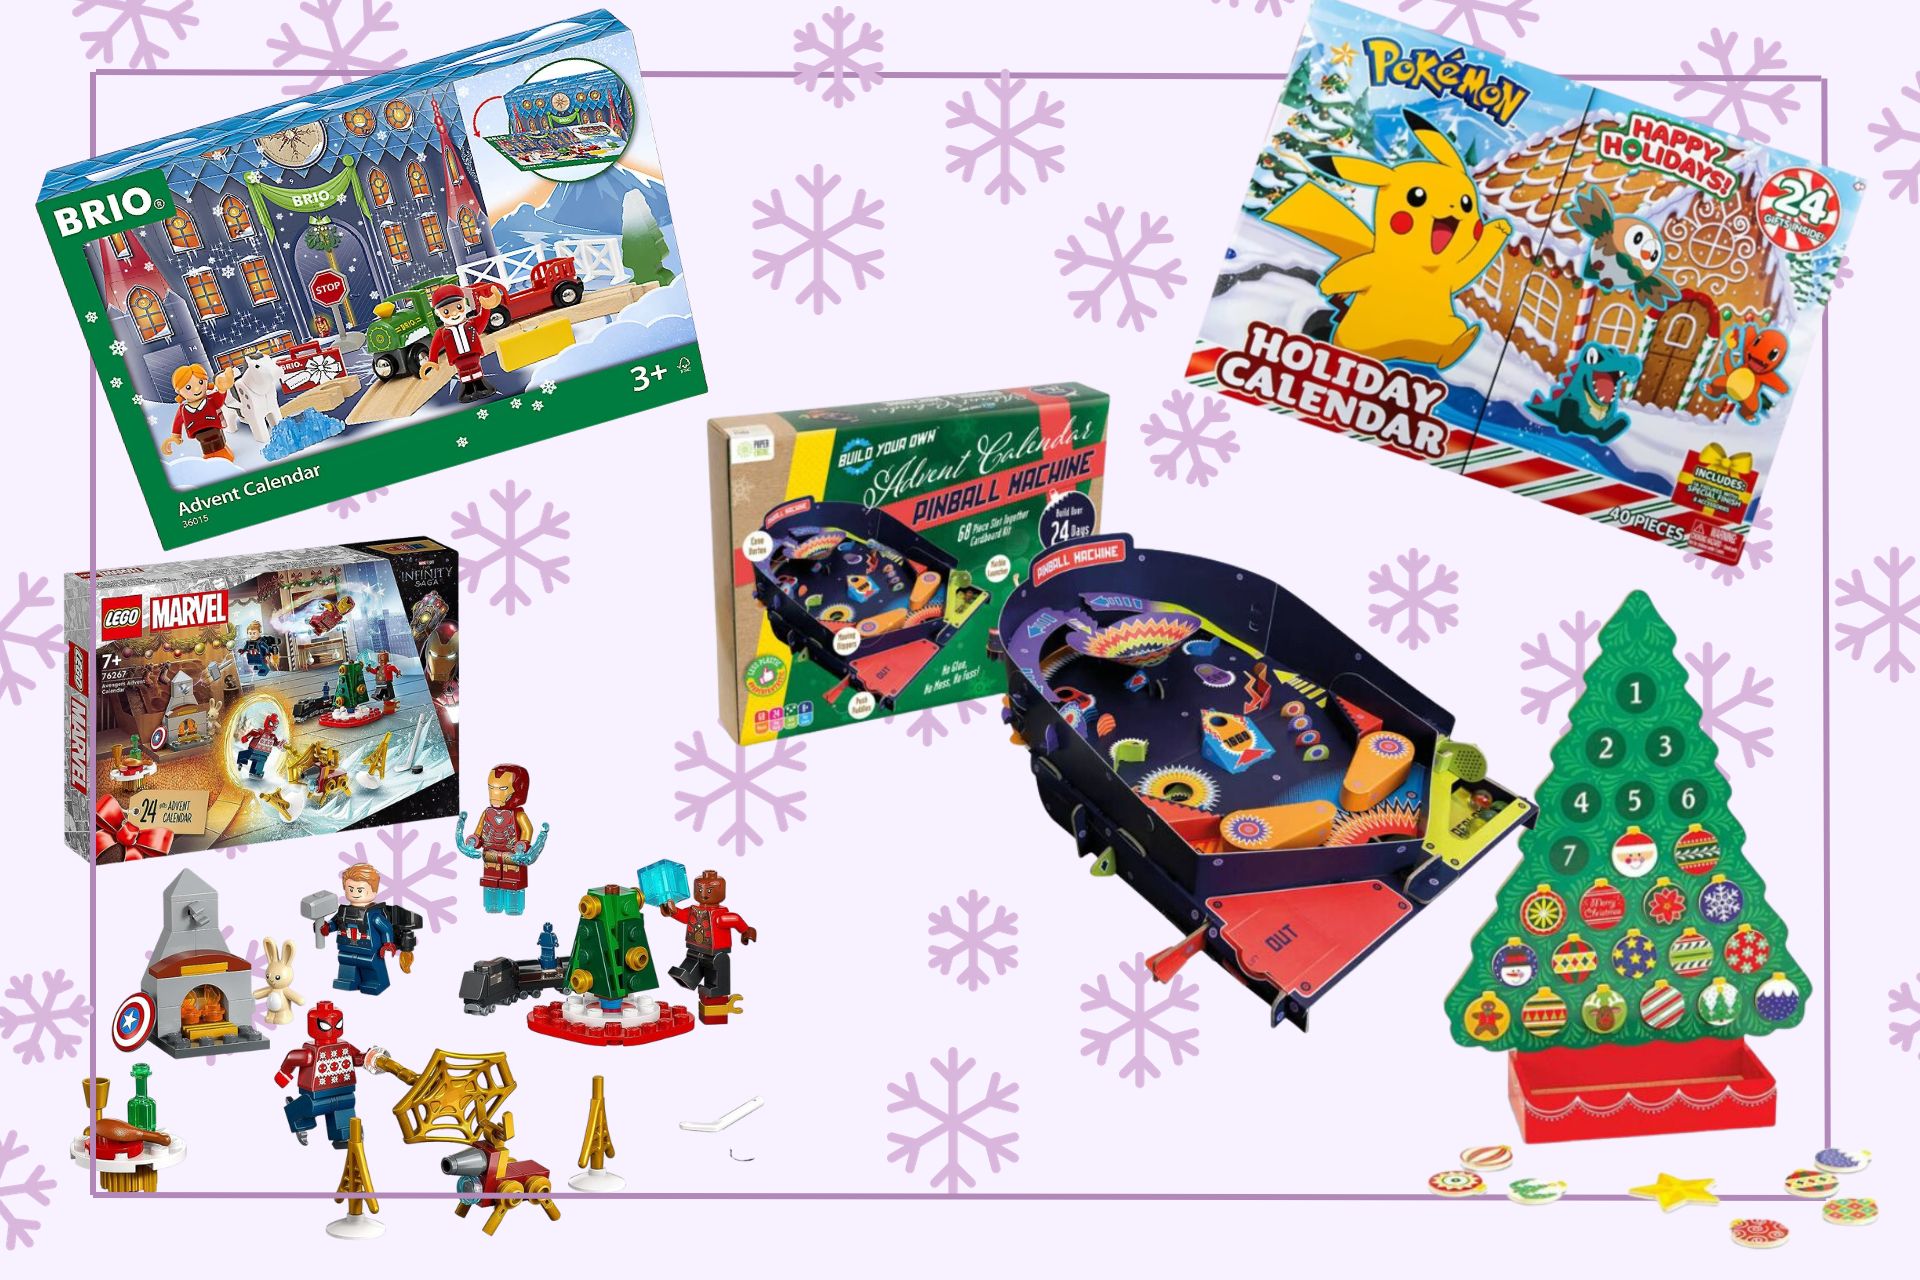 Best kids' toy-filled advent calendar 2022: Baby Born, Pokémon and more